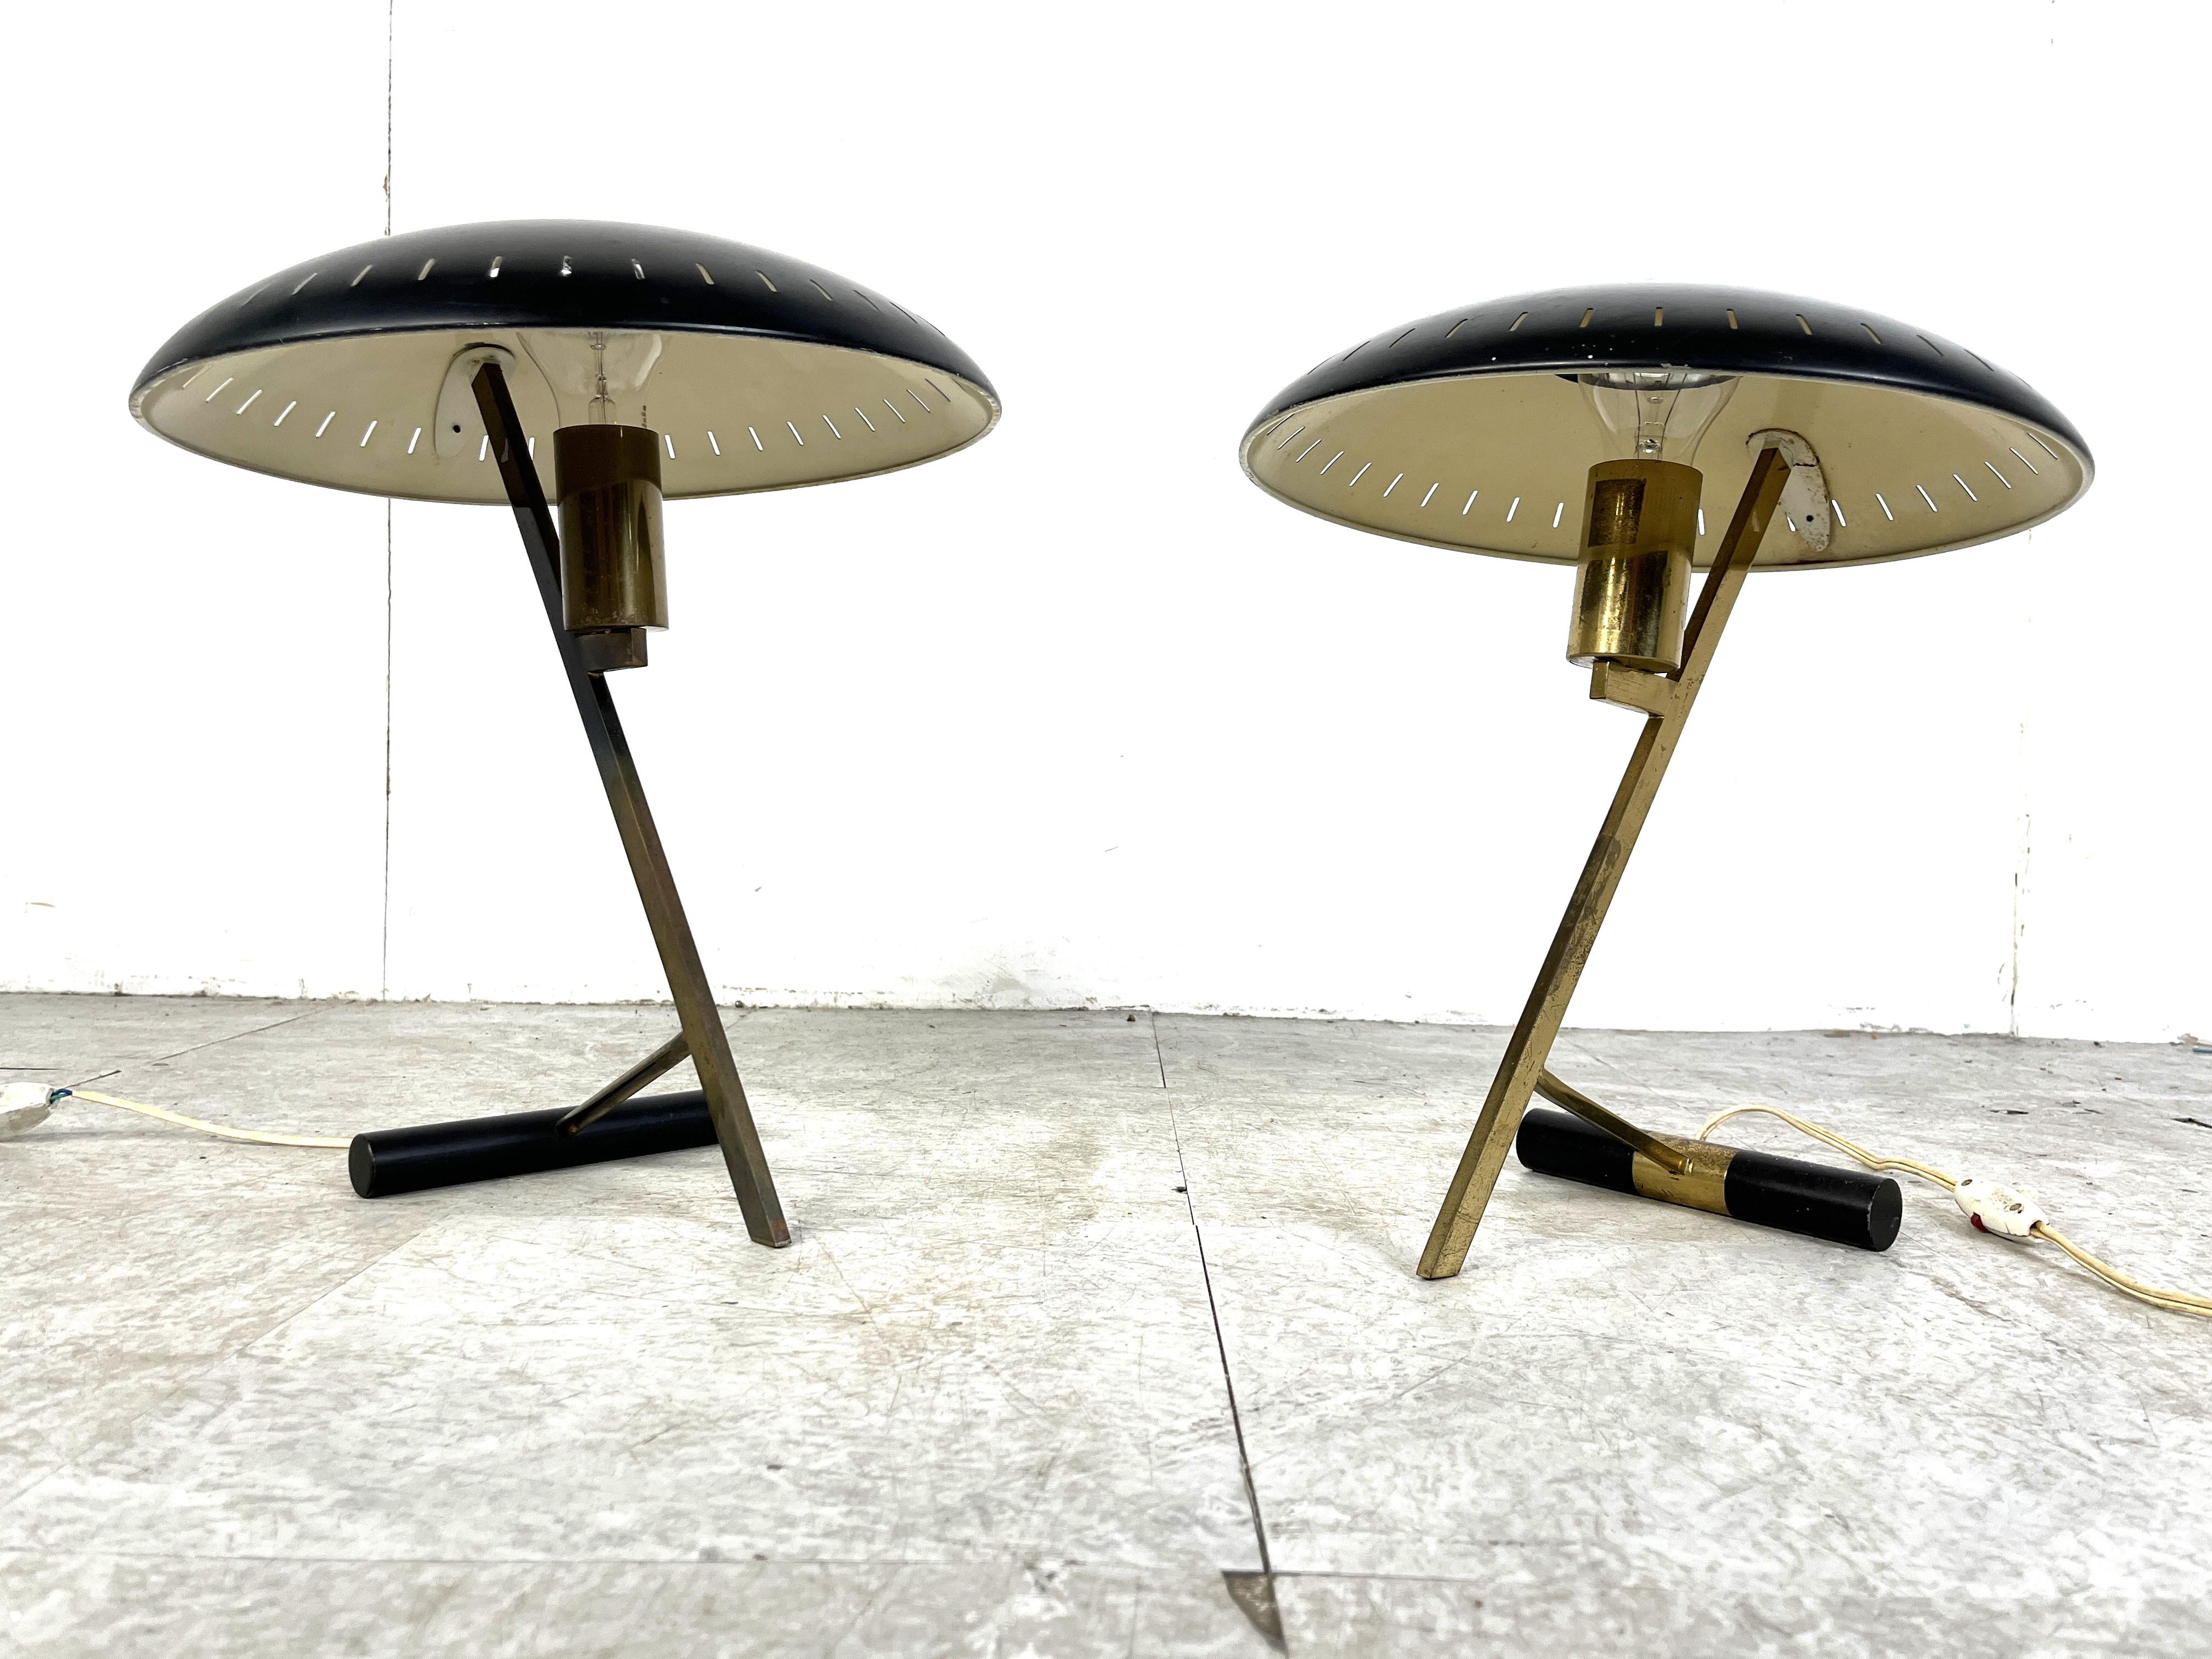 Z model or 'diplomat' table lamps designed by Louis Kalff for Philips.

This model is one of Louis Kalff's best designs.

It features a brass Z shaped base with a single light point.

The ufo styled shade is made of enamelled aluminum.

Manufactured